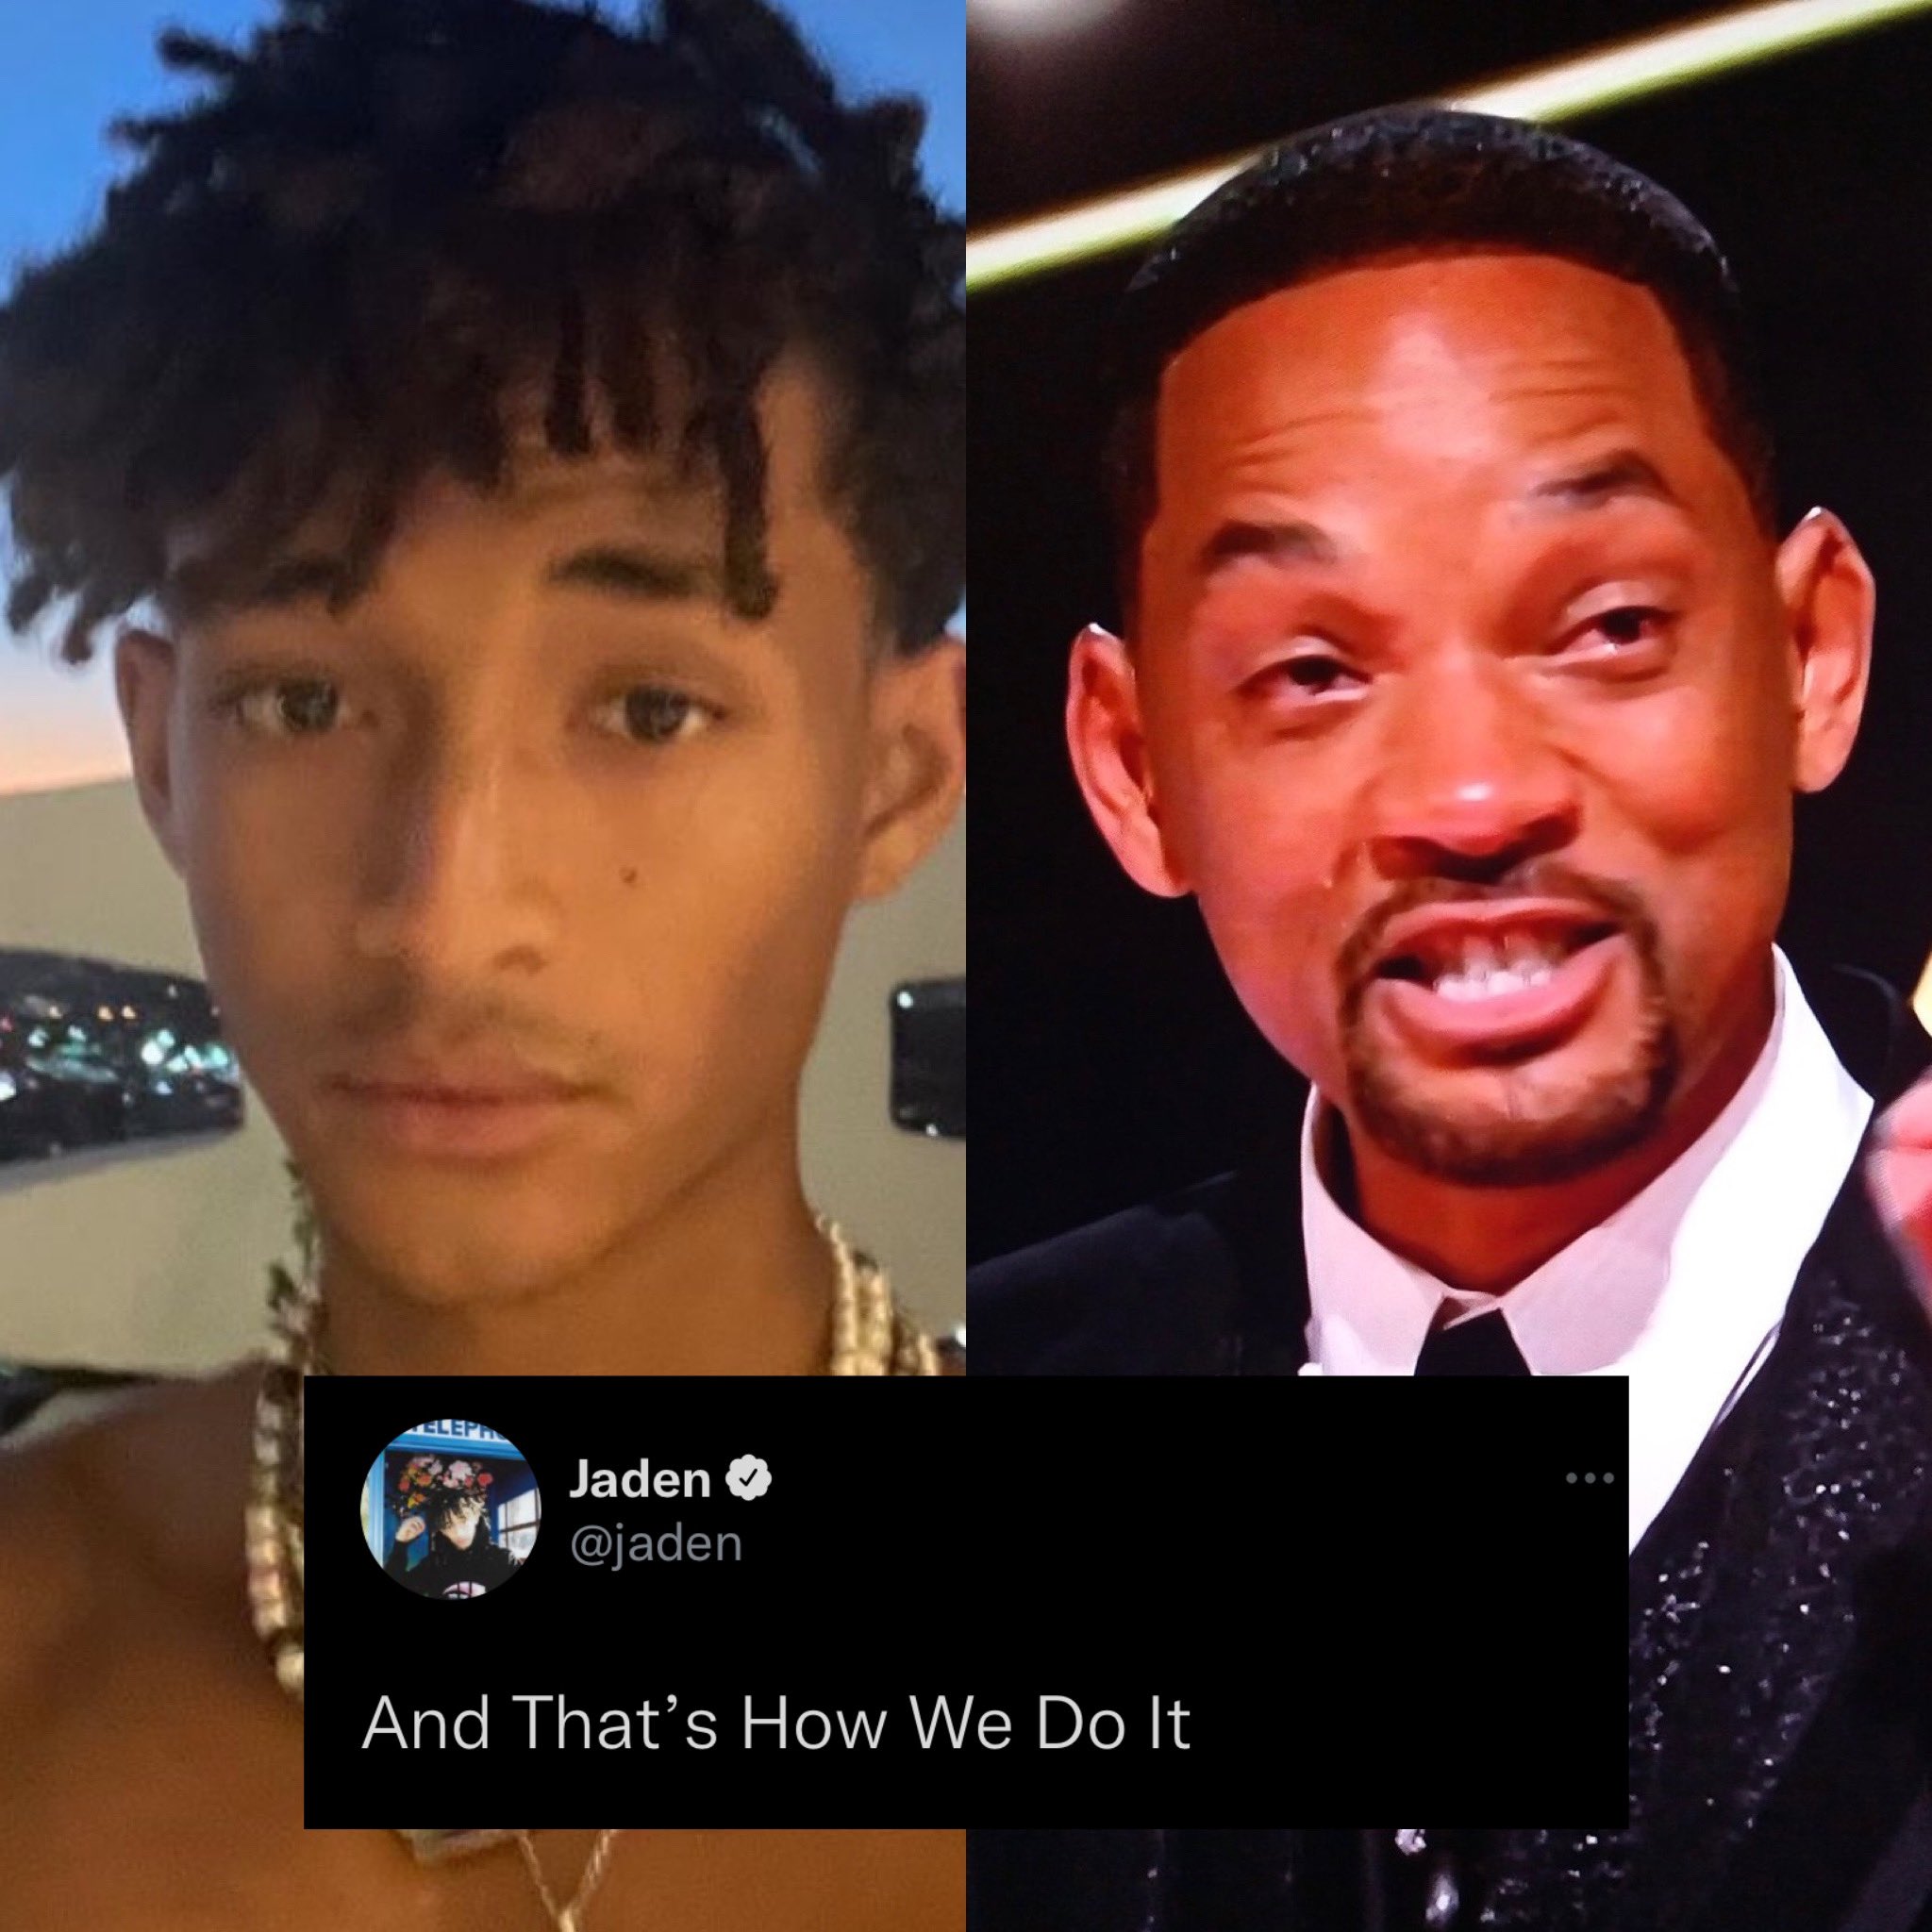  Jaden Smith Tweets ‘That’s How We Do It’ After Dad Will Smith’s Oscar Win and Chris Rock Smack.